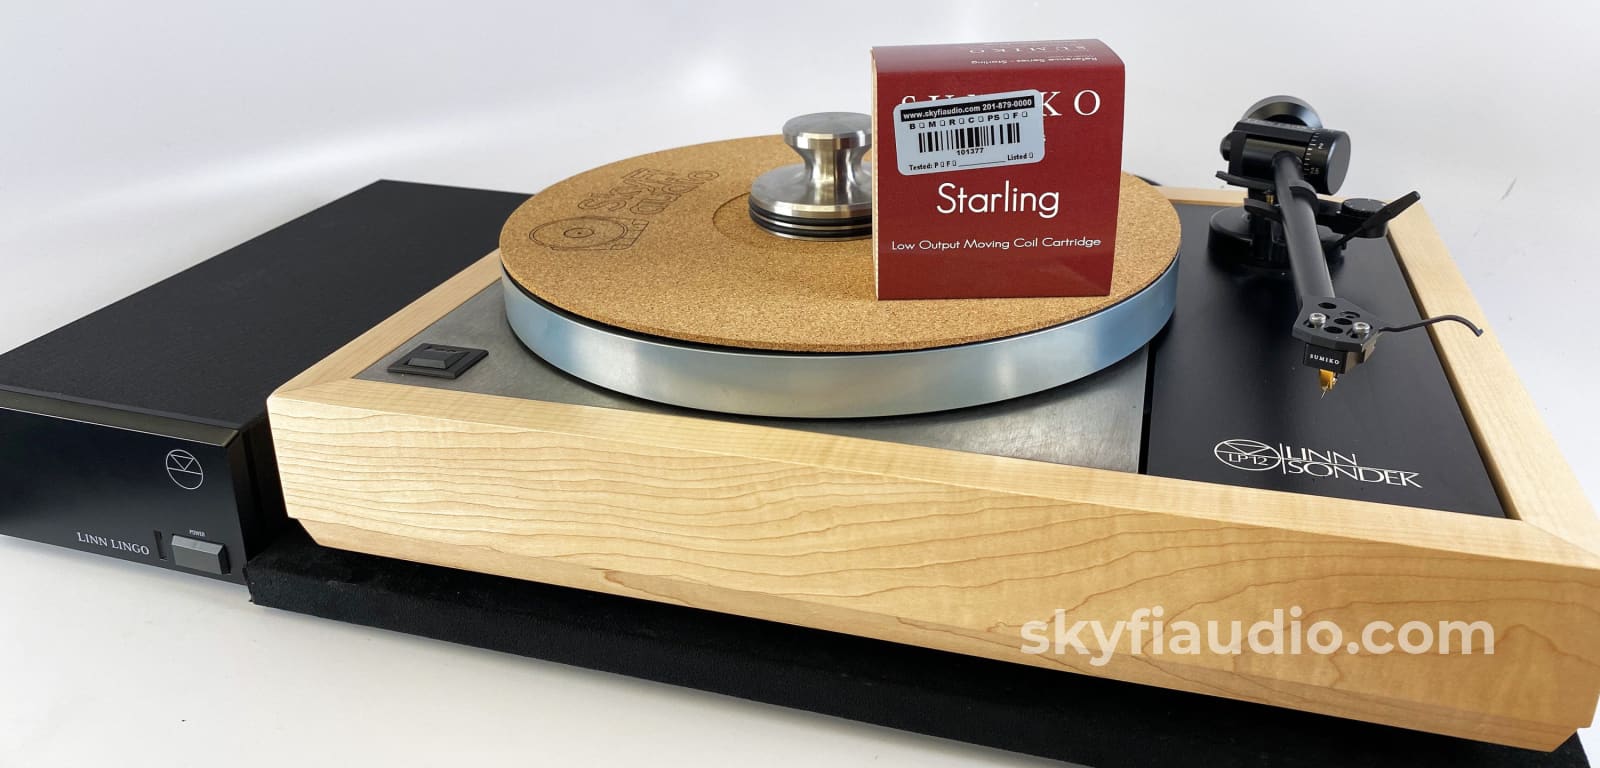 Linn Lp12 Turntable - Loaded And Upgraded With The Best Lingo Ekos...